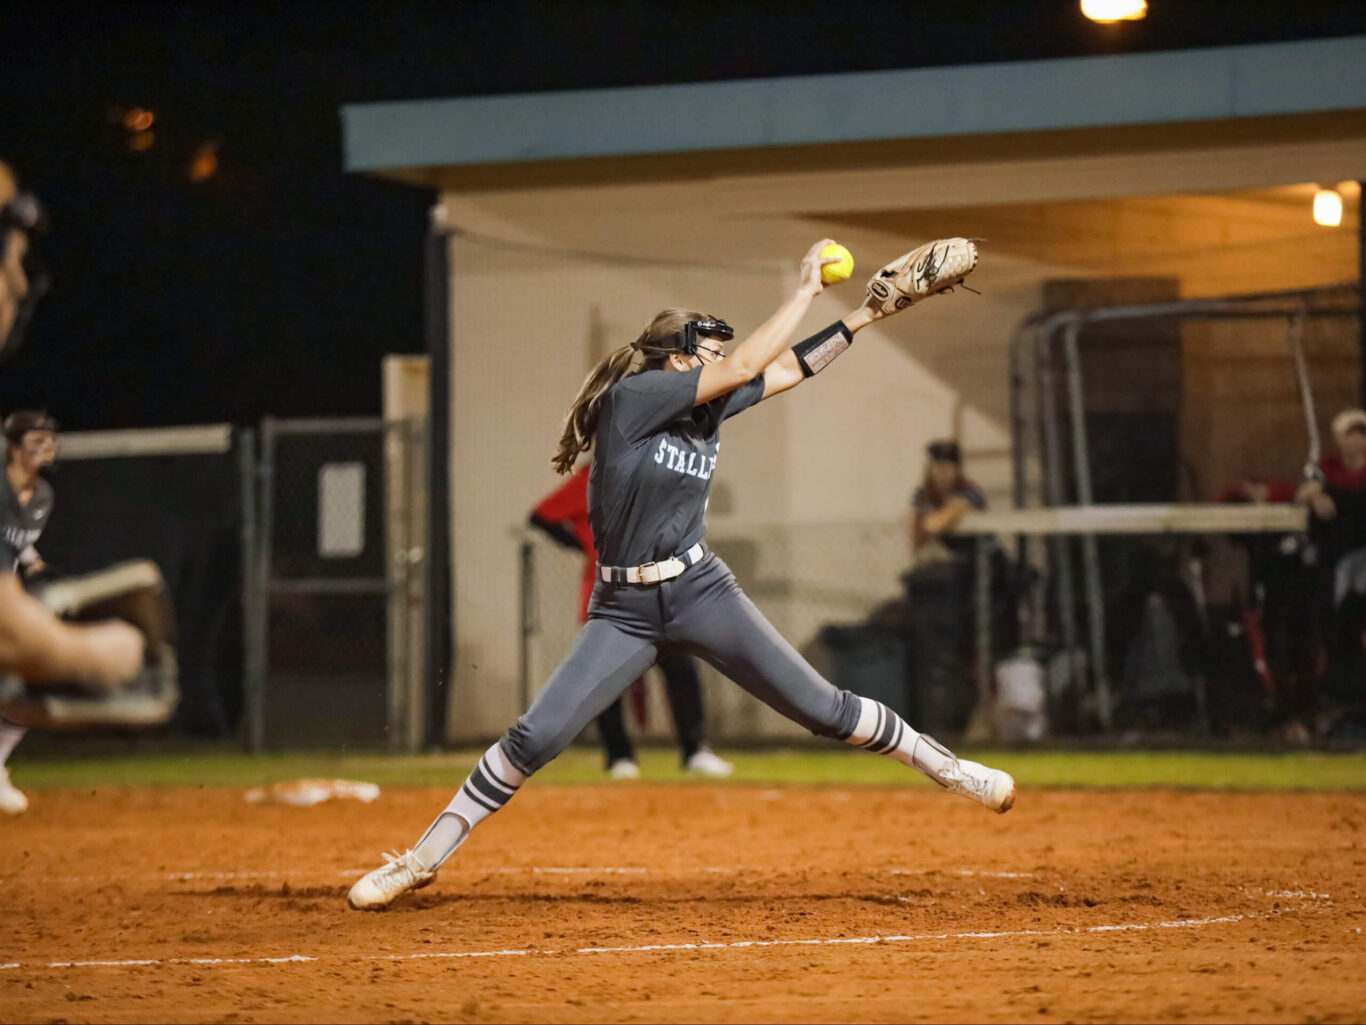 A girls' softball player swinging at a ball during a game.